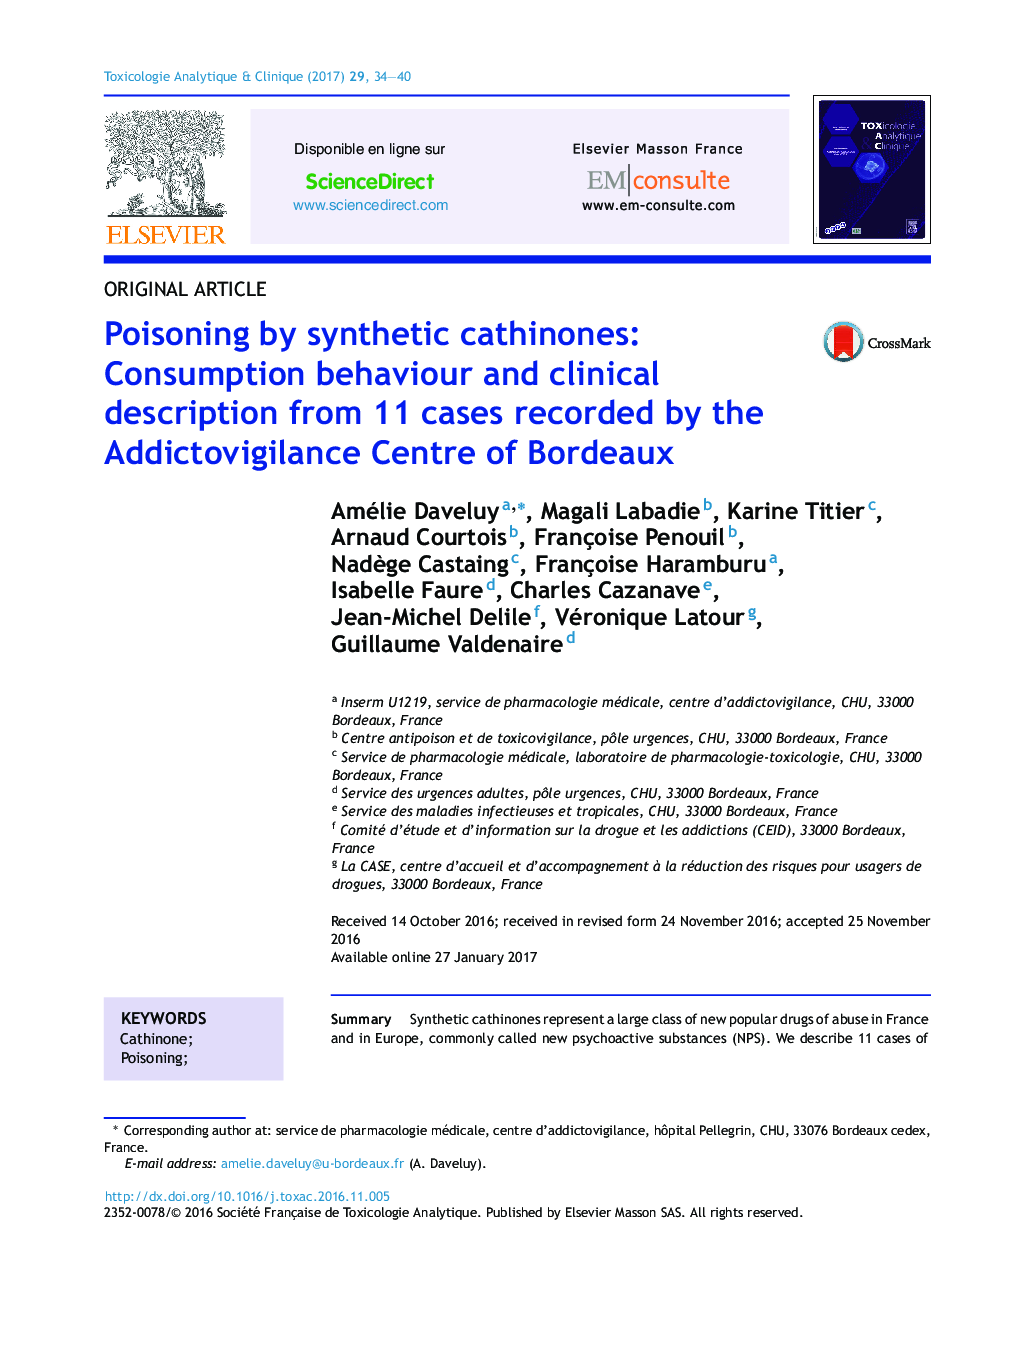 Poisoning by synthetic cathinones: Consumption behaviour and clinical description from 11 cases recorded by the Addictovigilance Centre of Bordeaux